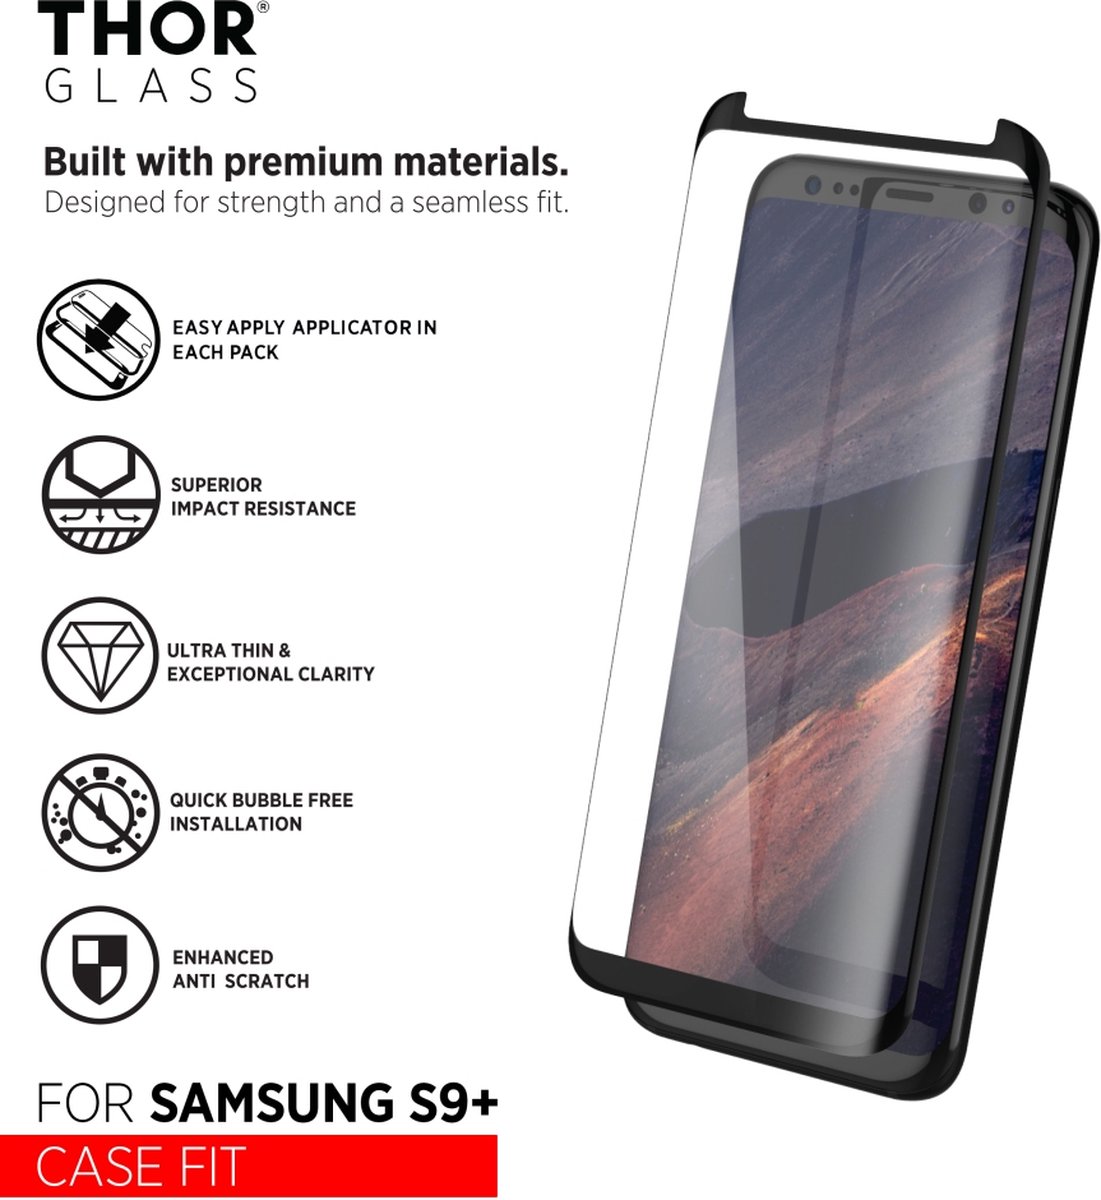 THOR Glass Screenprotector Case-Fit Samsung Galaxy S9 Plus